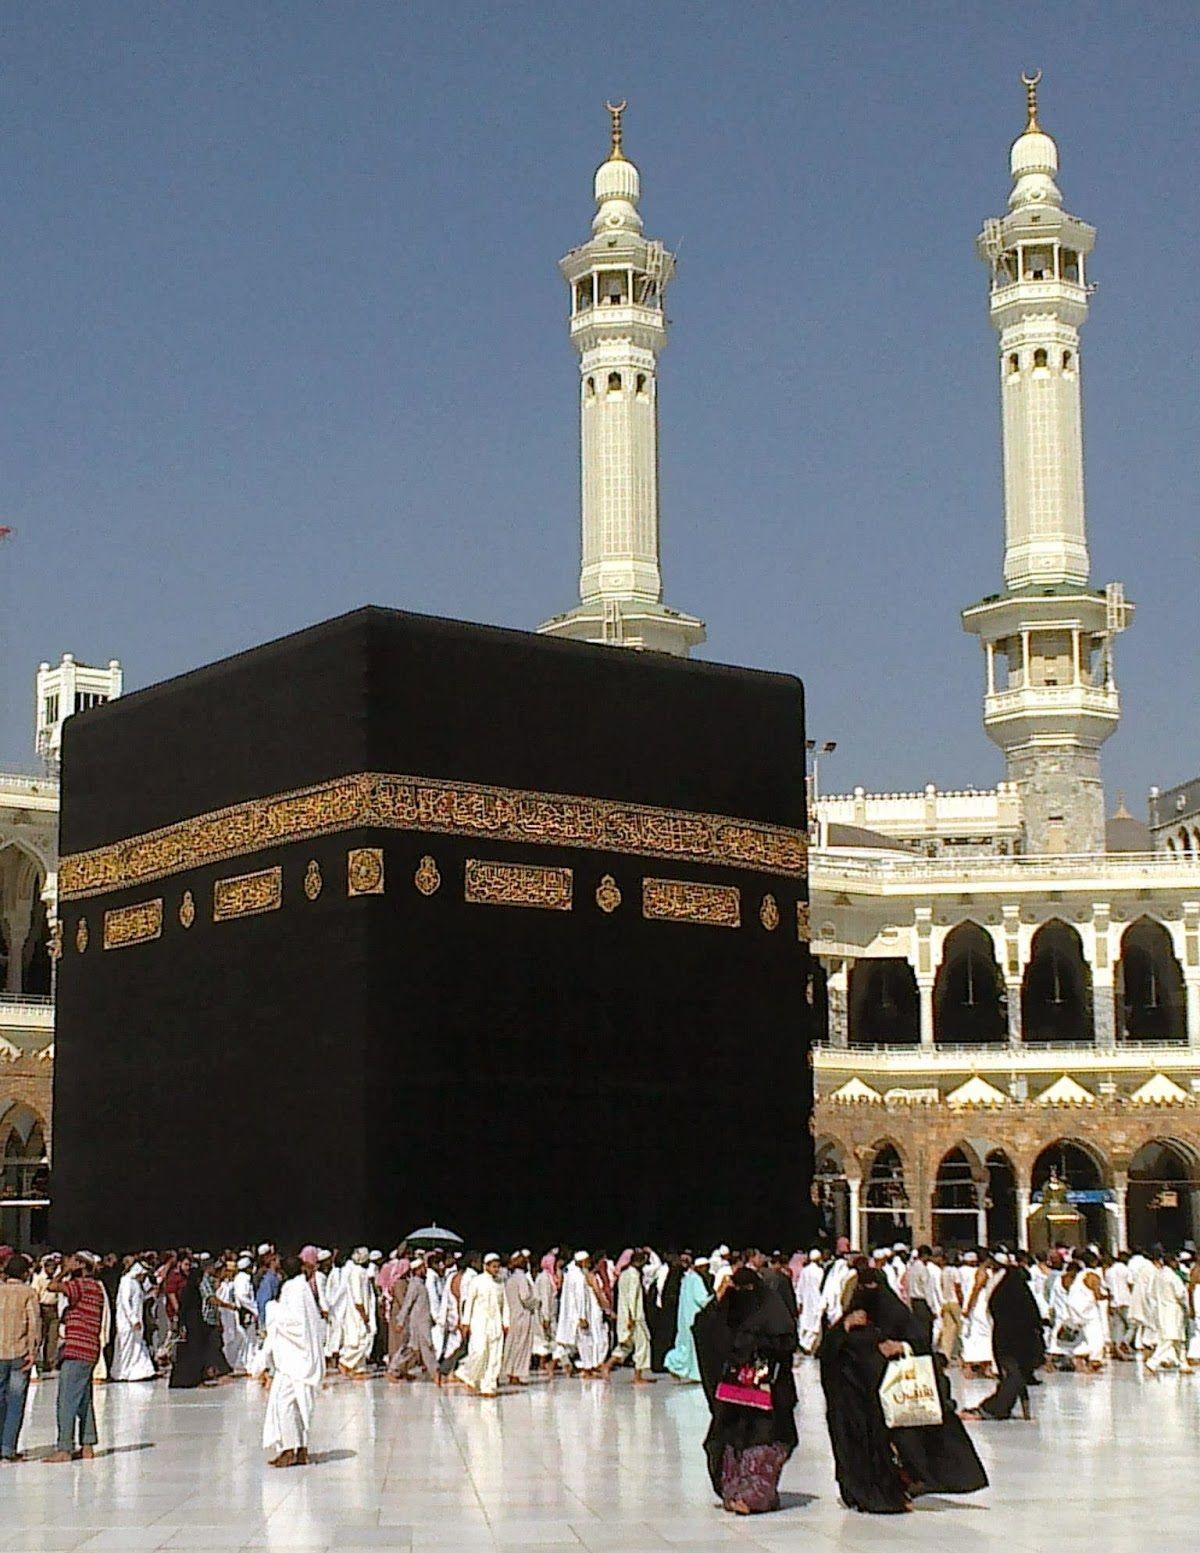 Kaaba Hd Wallpaper 1920x1080 - HD Wallpaper For Desktop Background | Smartphone | Android | IOS